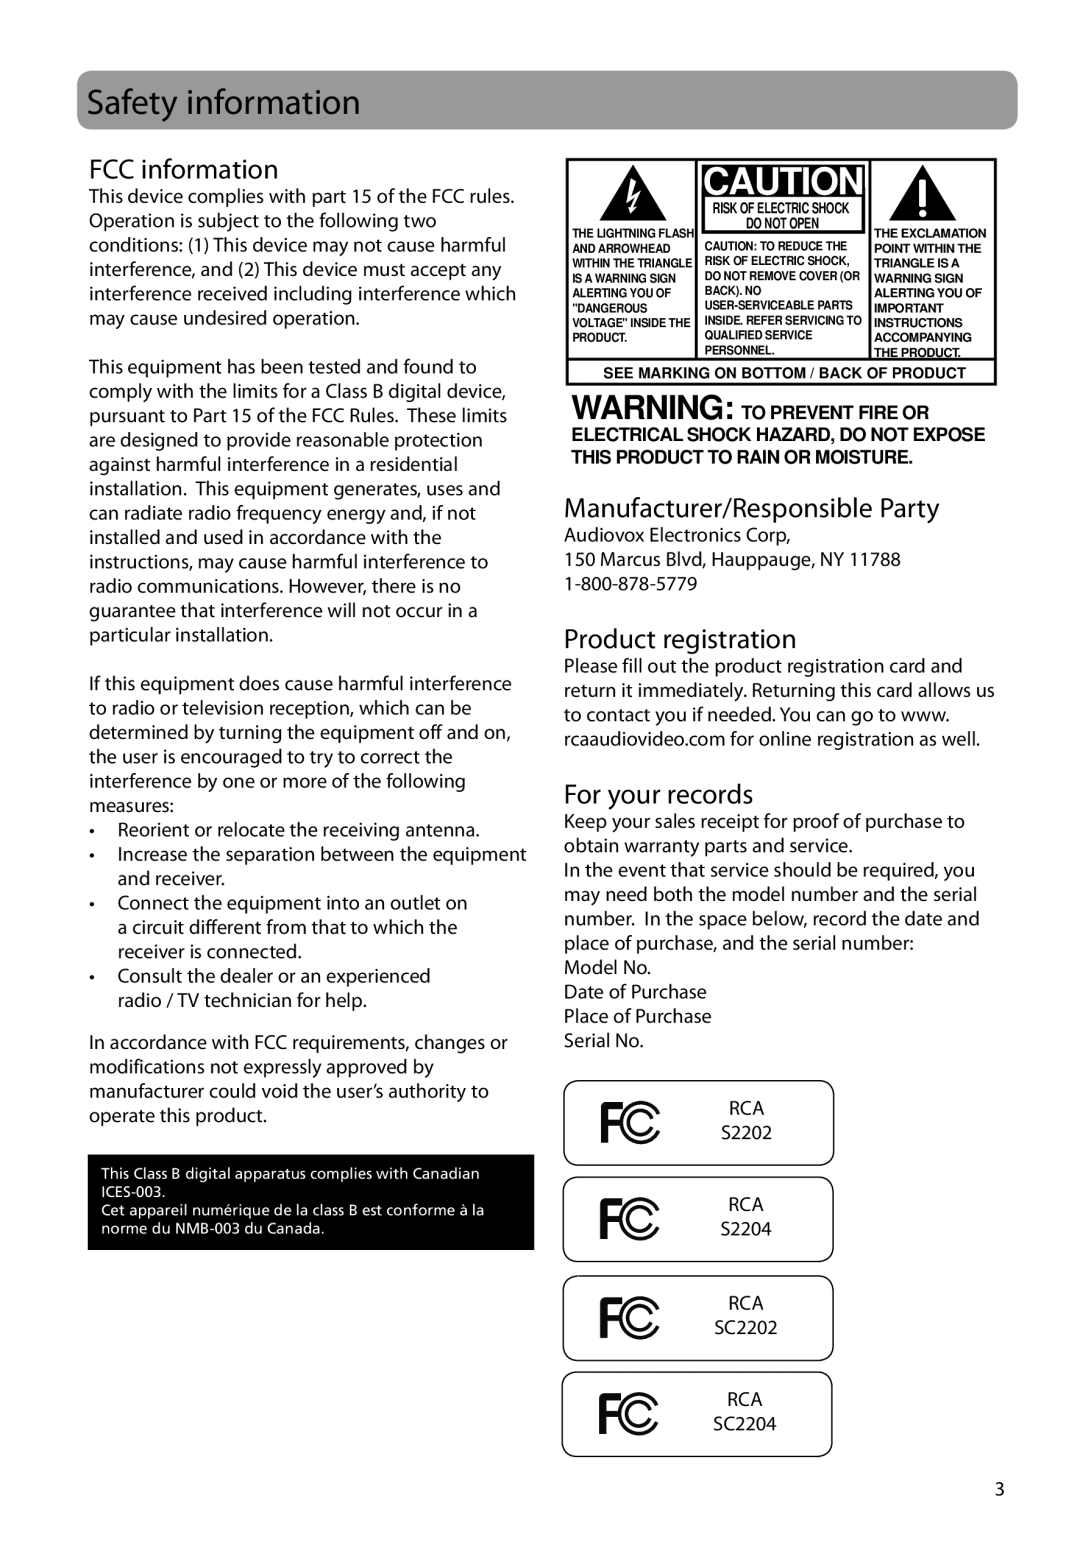 RCA SC2204 Safety information, FCC information, Manufacturer/Responsible Party, Product registration, For your records 